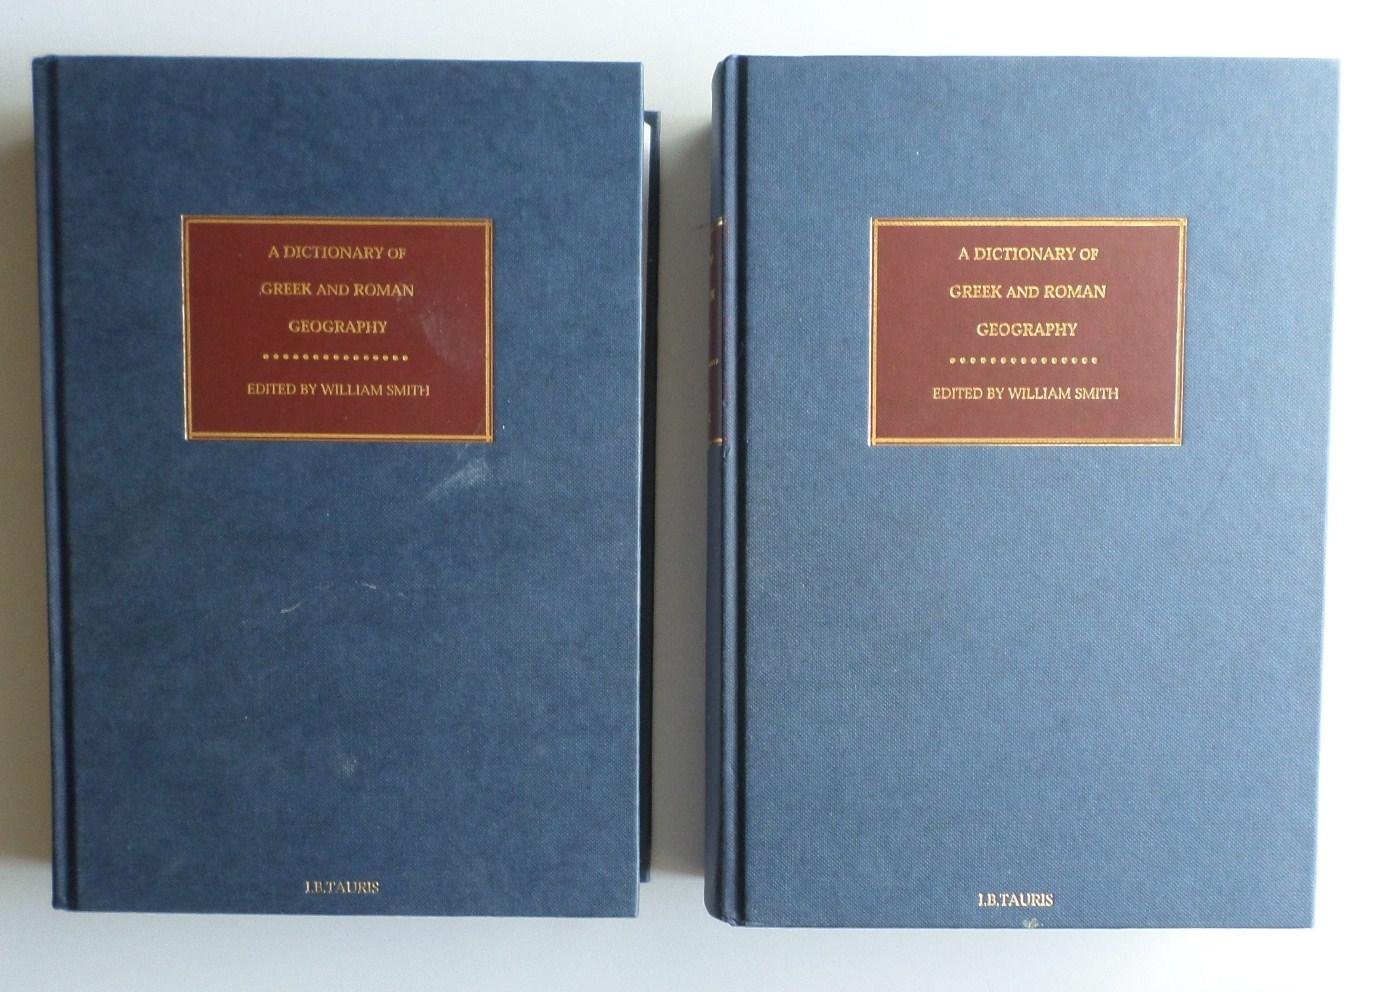 Smith, W. - A dictionary of Greek and Roman geography. (2 vols.) (reprint 1872)